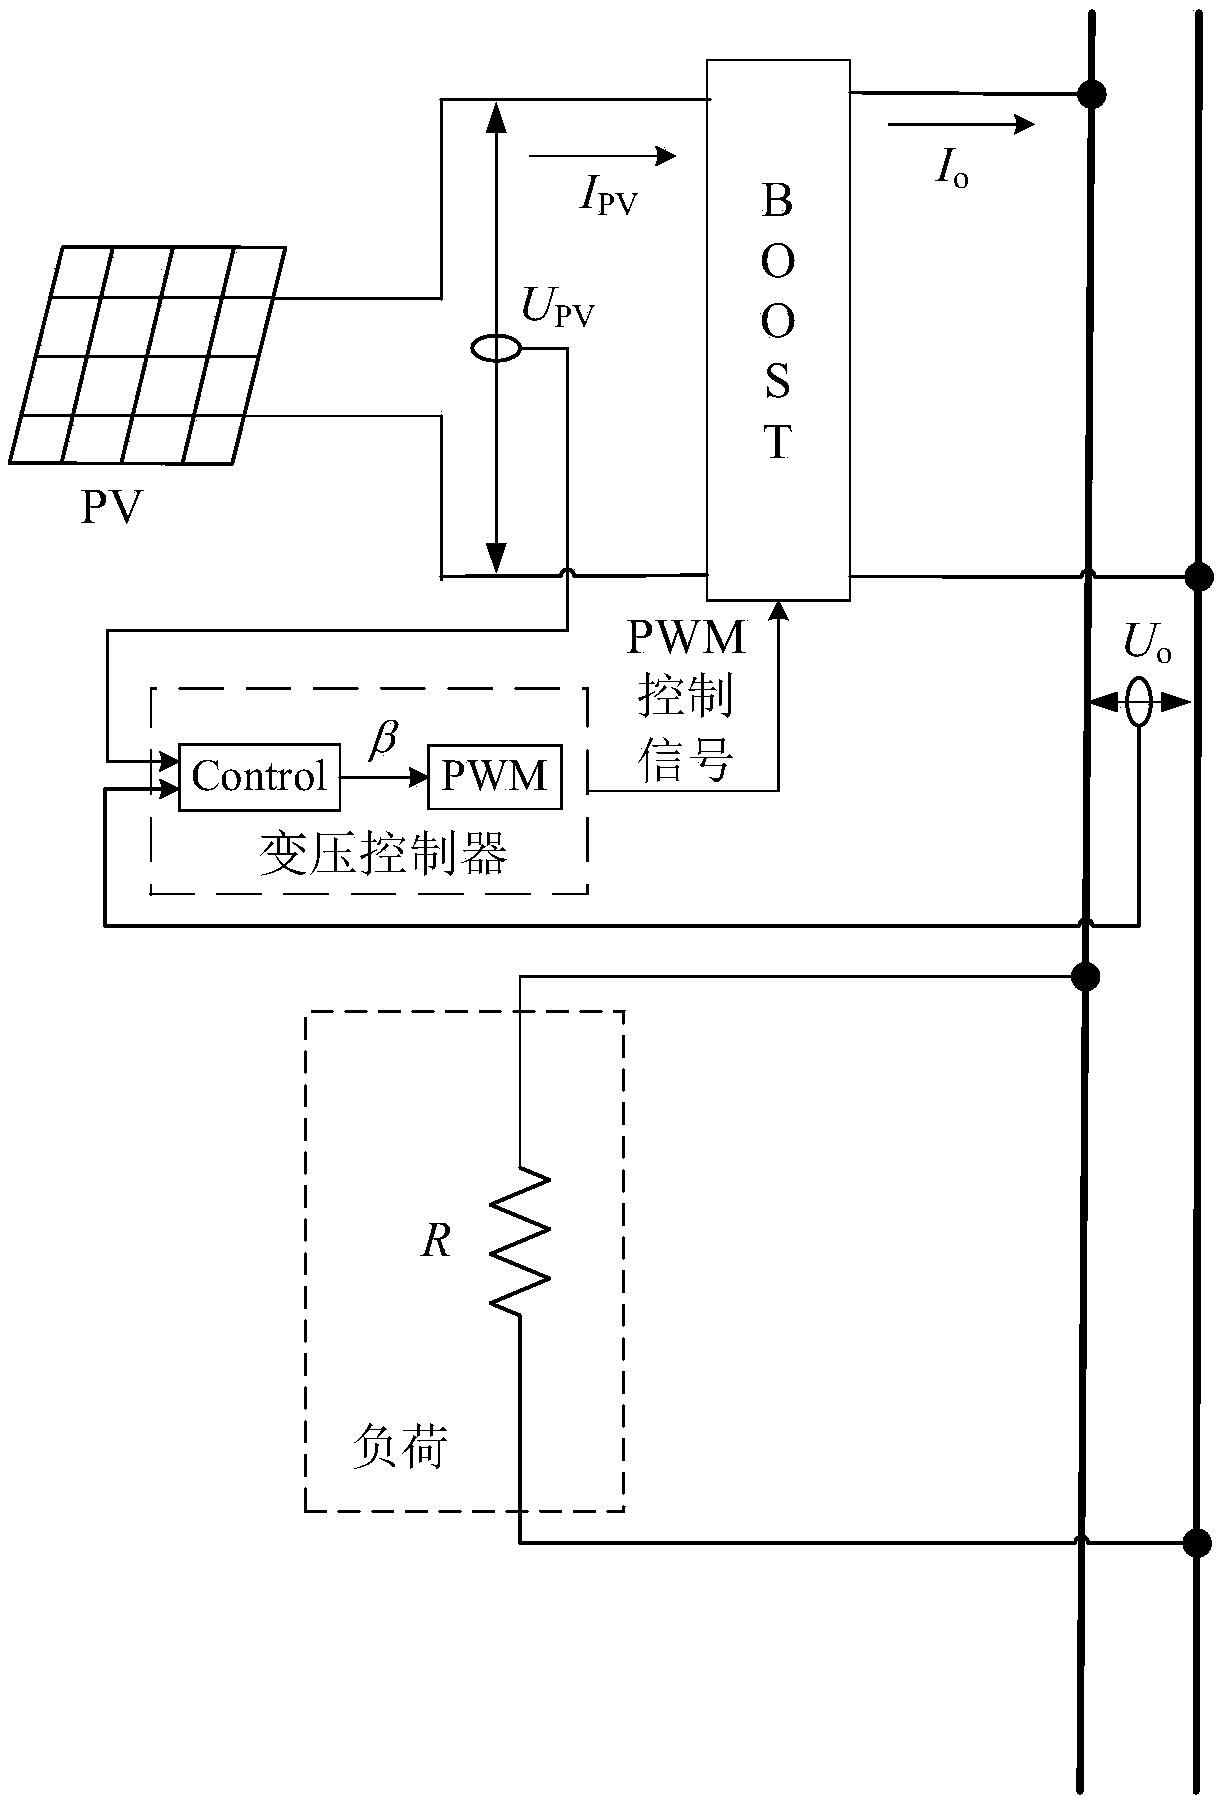 Variable voltage control method of photovoltaic cell